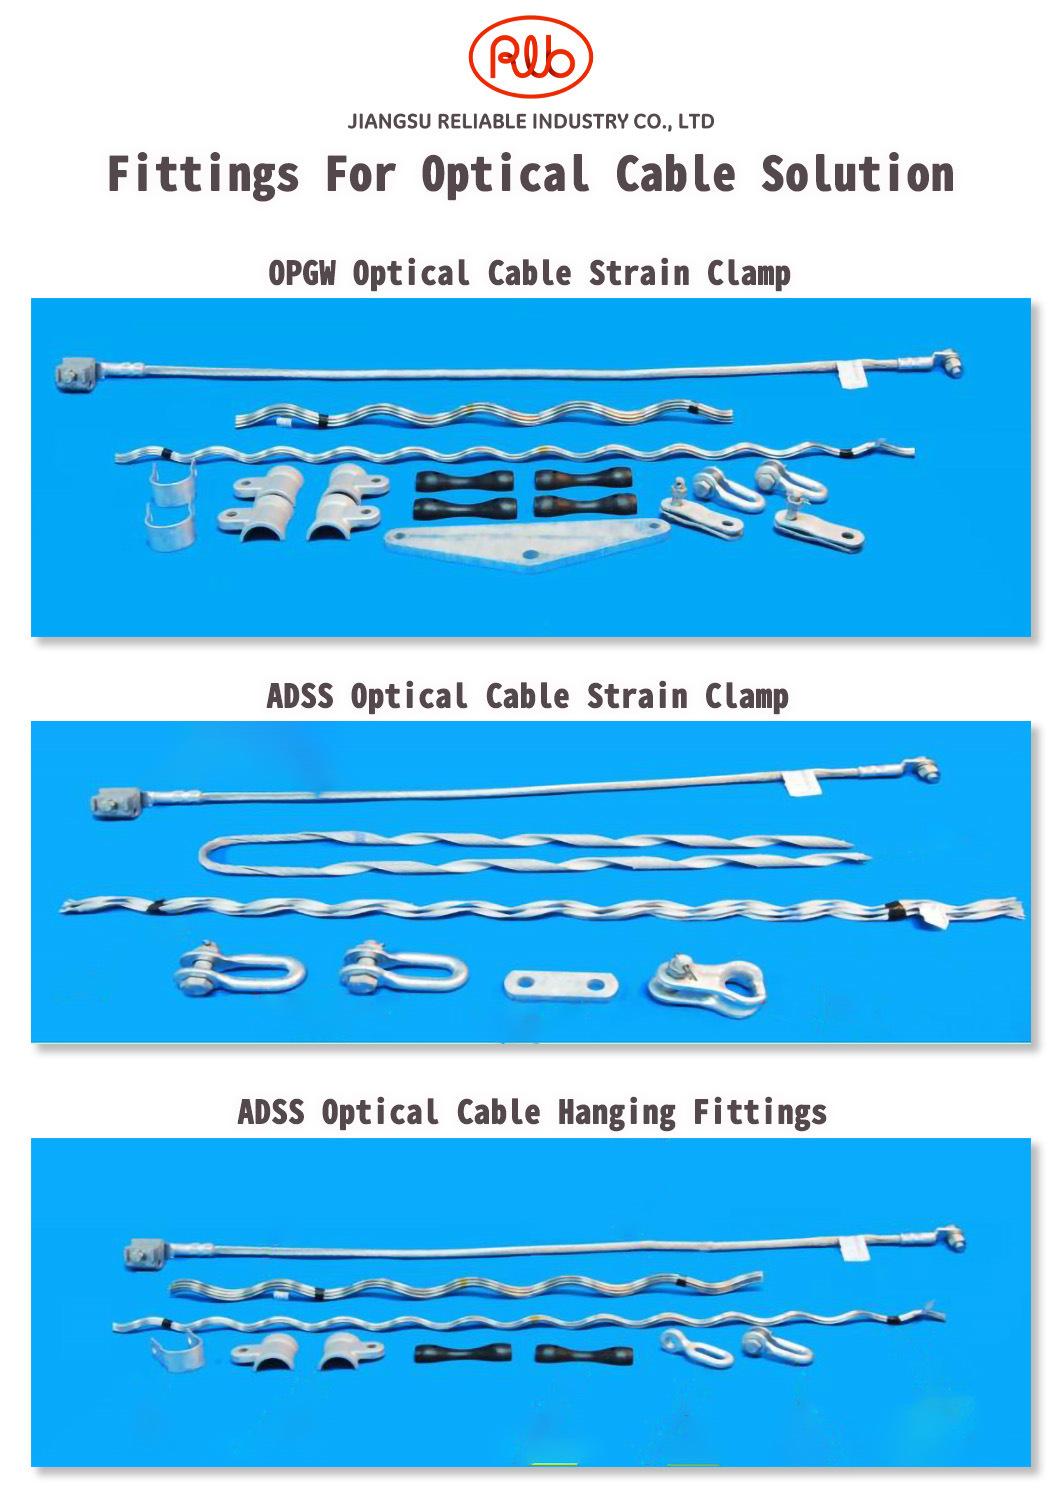 Opgw-Aluminum Clad Loose Tube Opgw Optical Cables